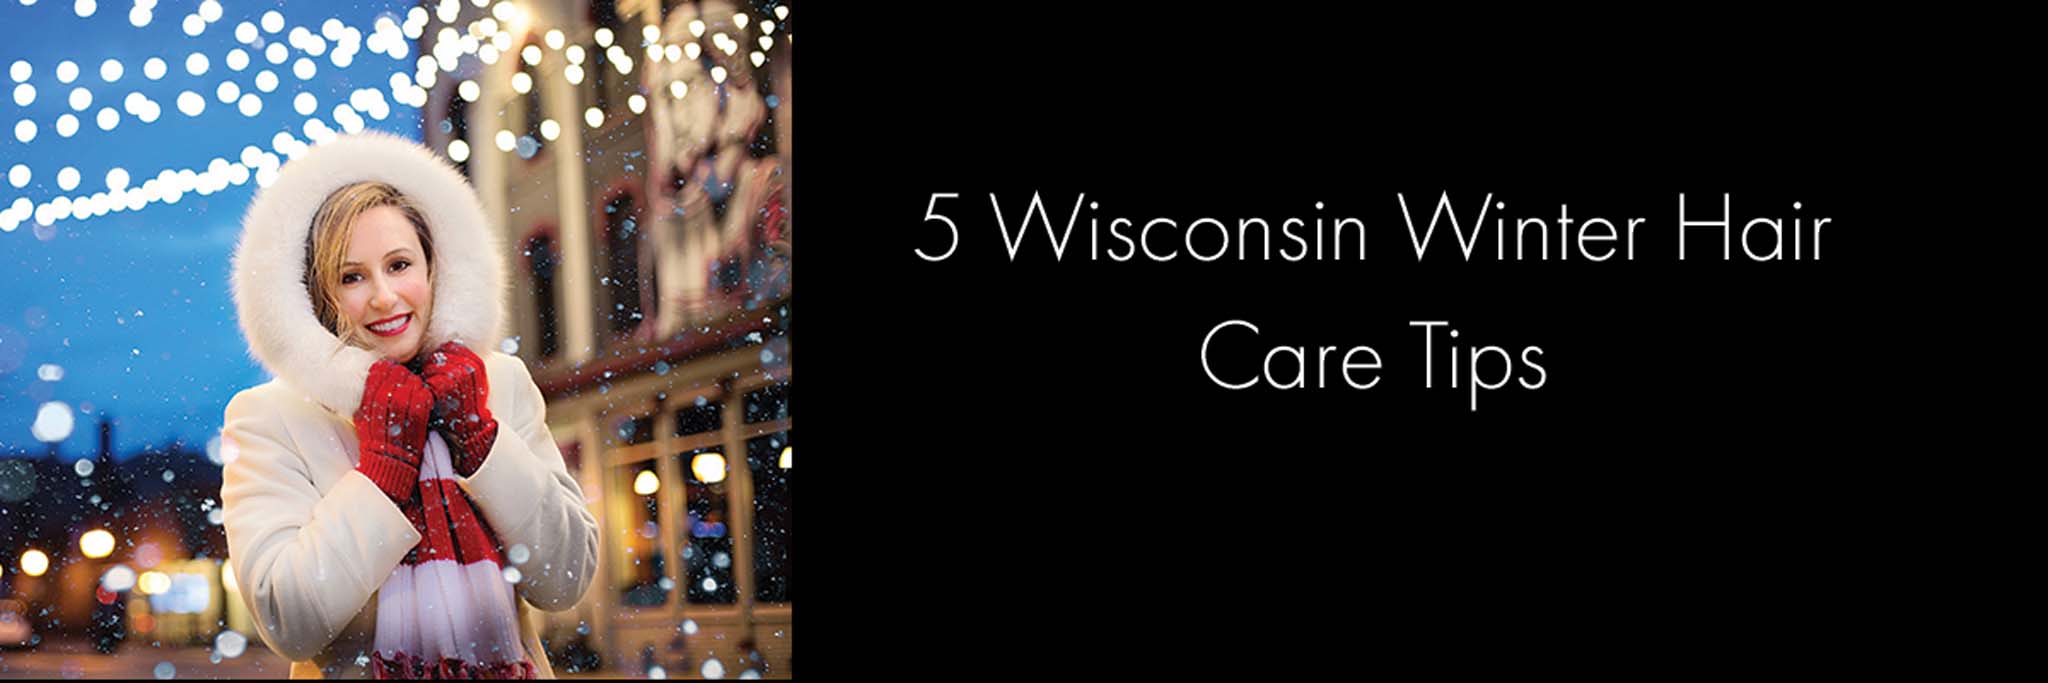 5 Wisconsin Winter Hair Care Tips